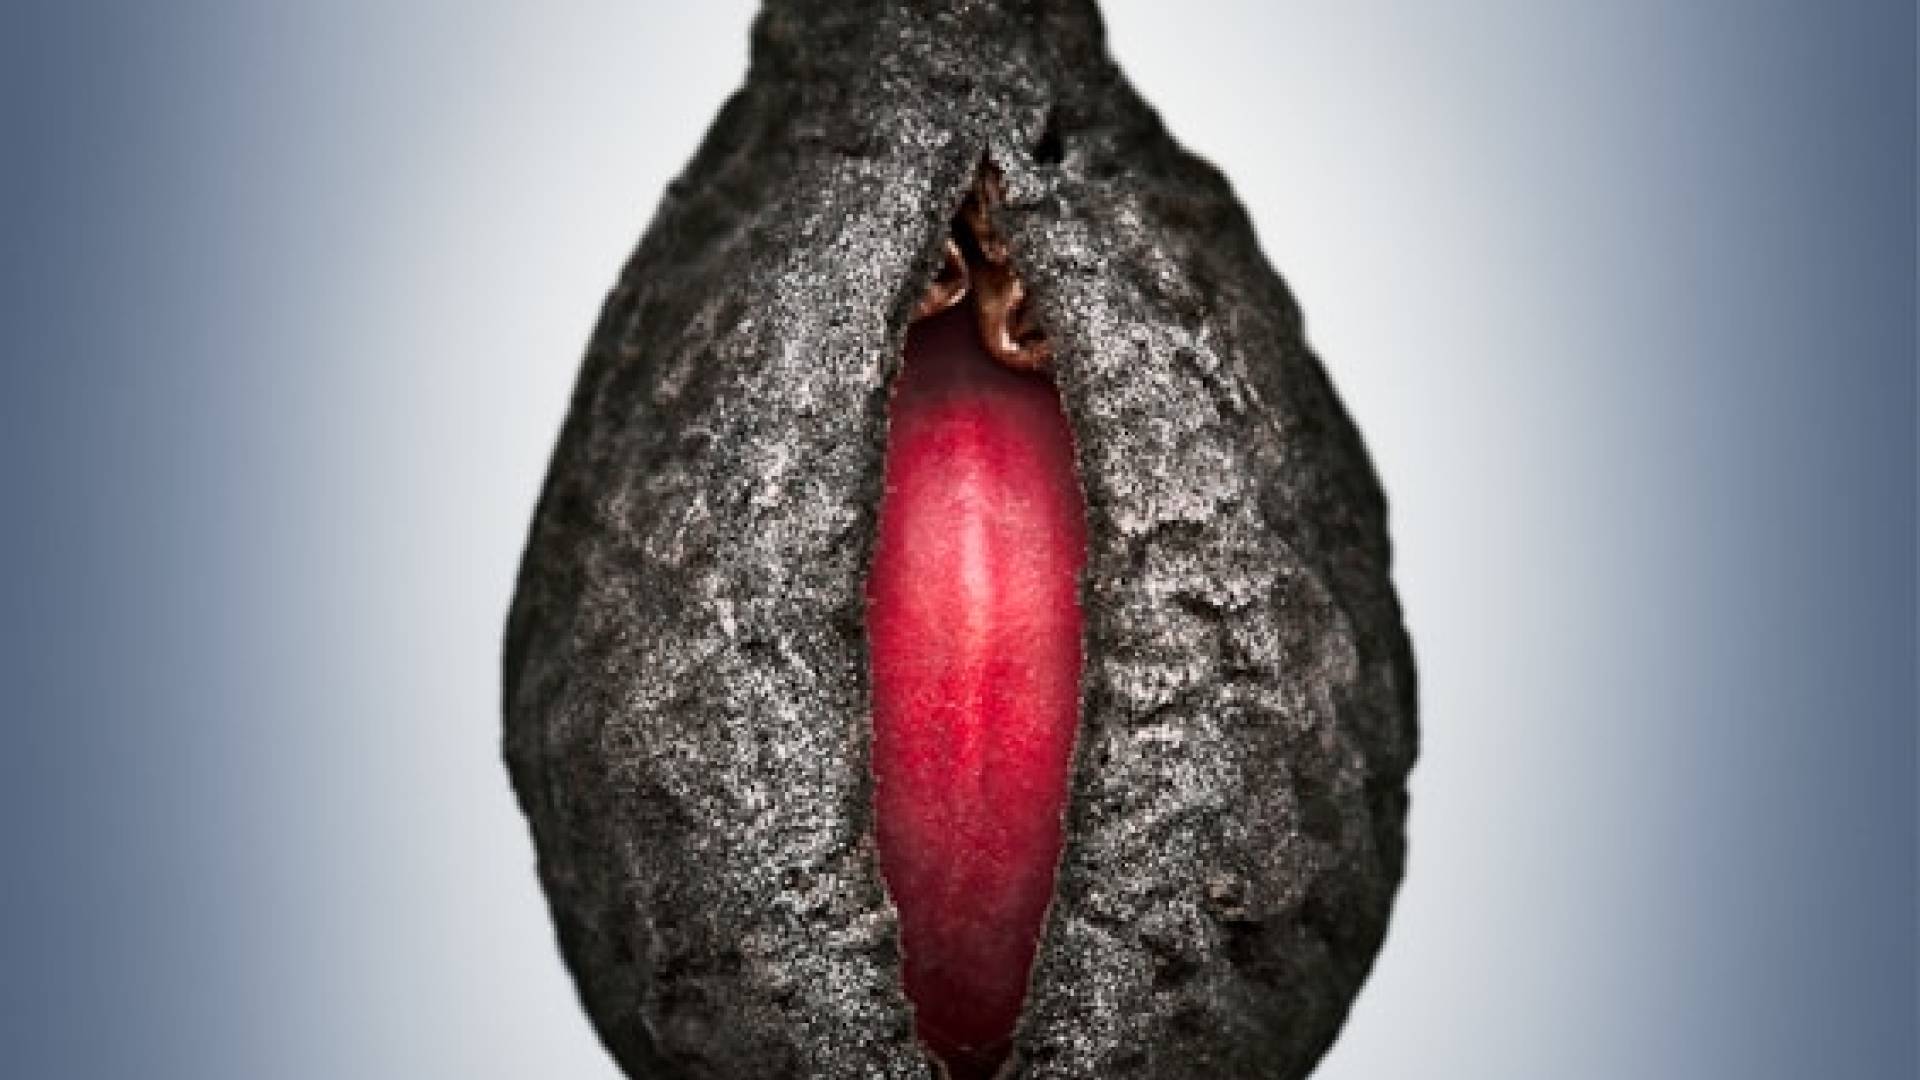 Close up of black seed husk with red seed in center.